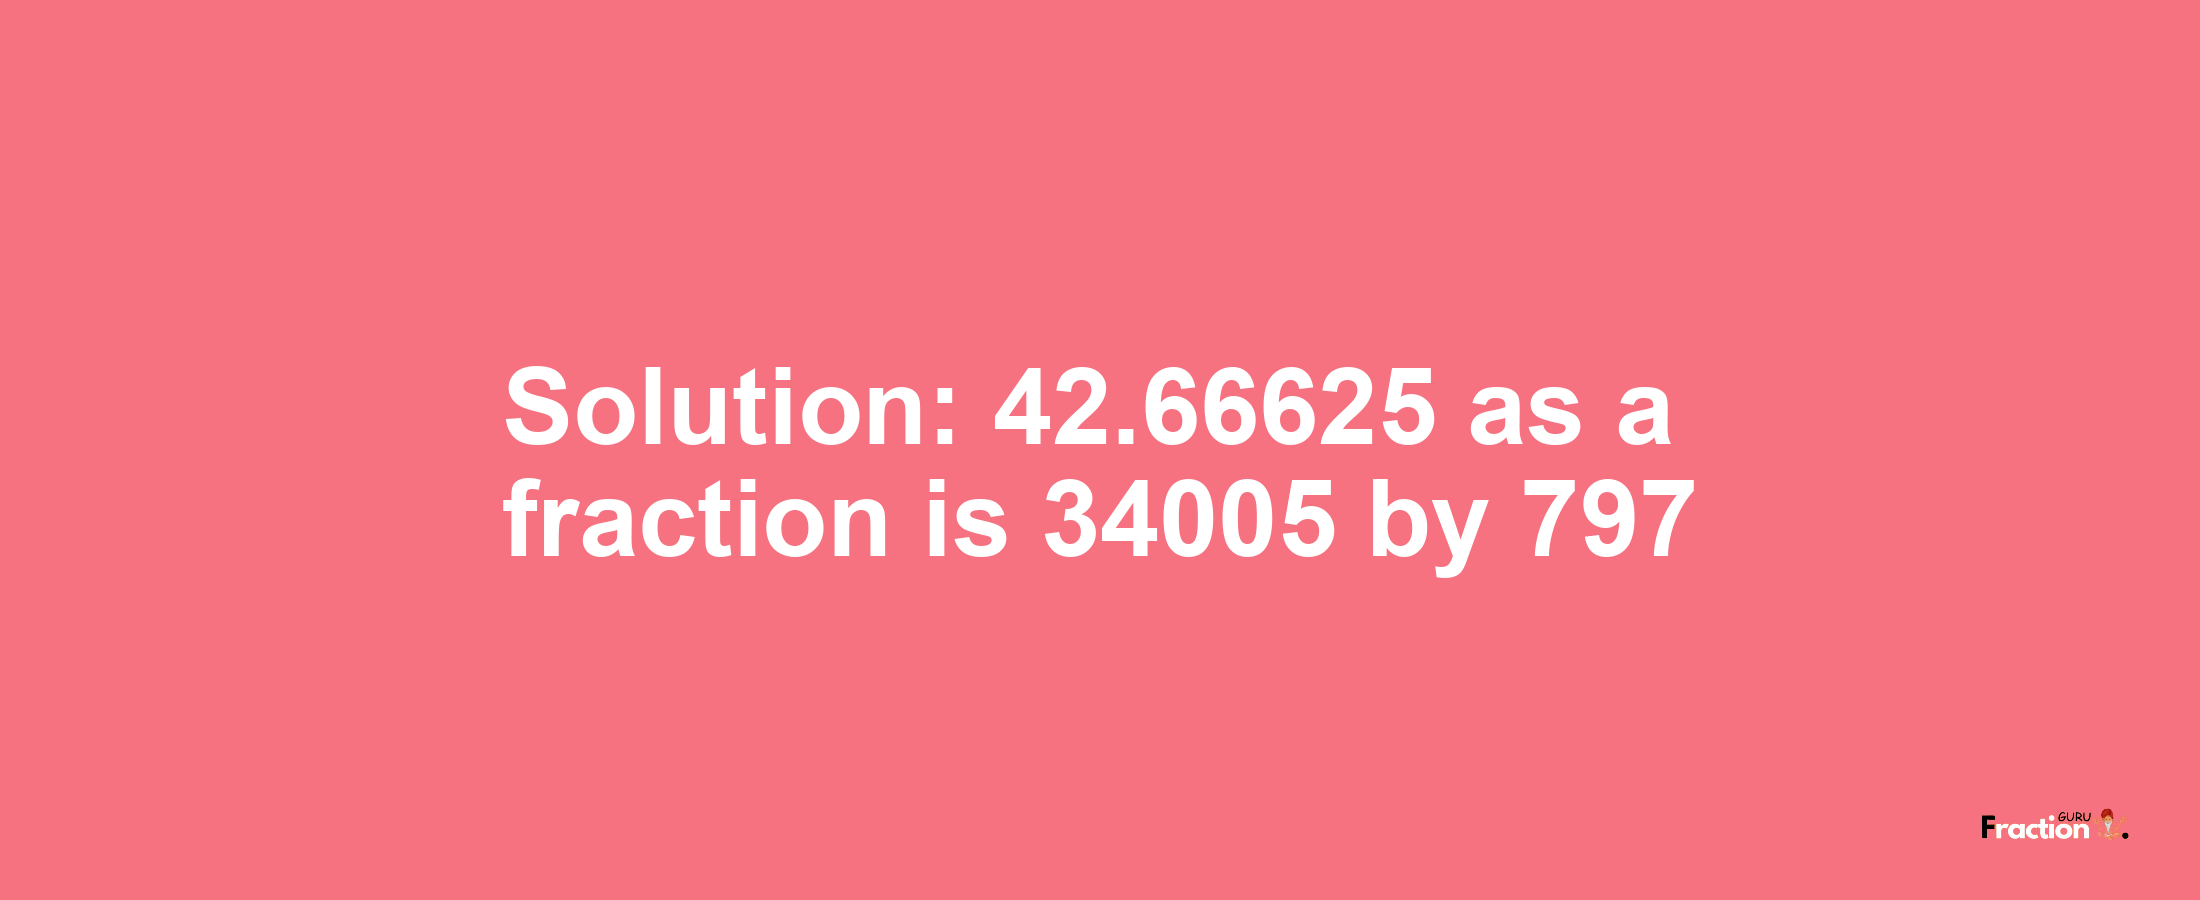 Solution:42.66625 as a fraction is 34005/797